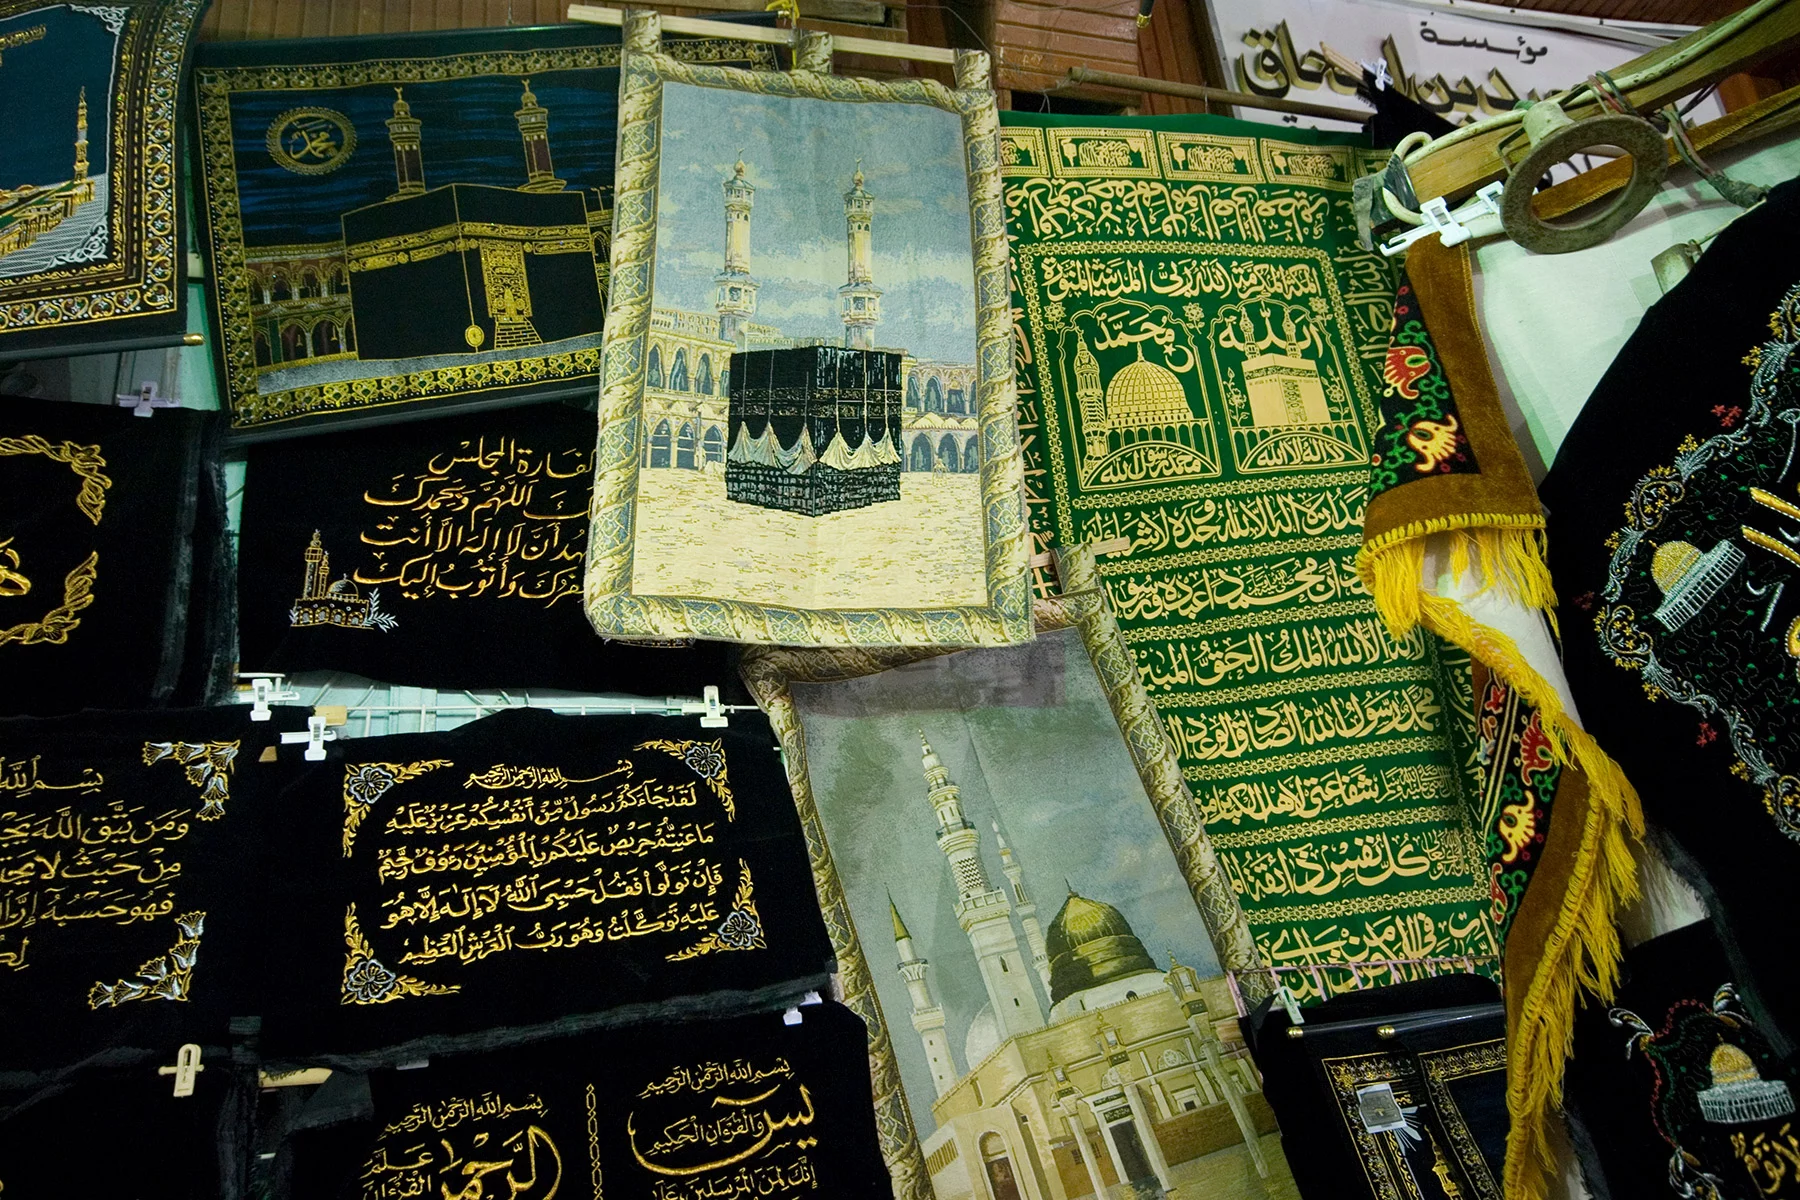 A stall selling fabrics with images of Makkah including Arabic writing